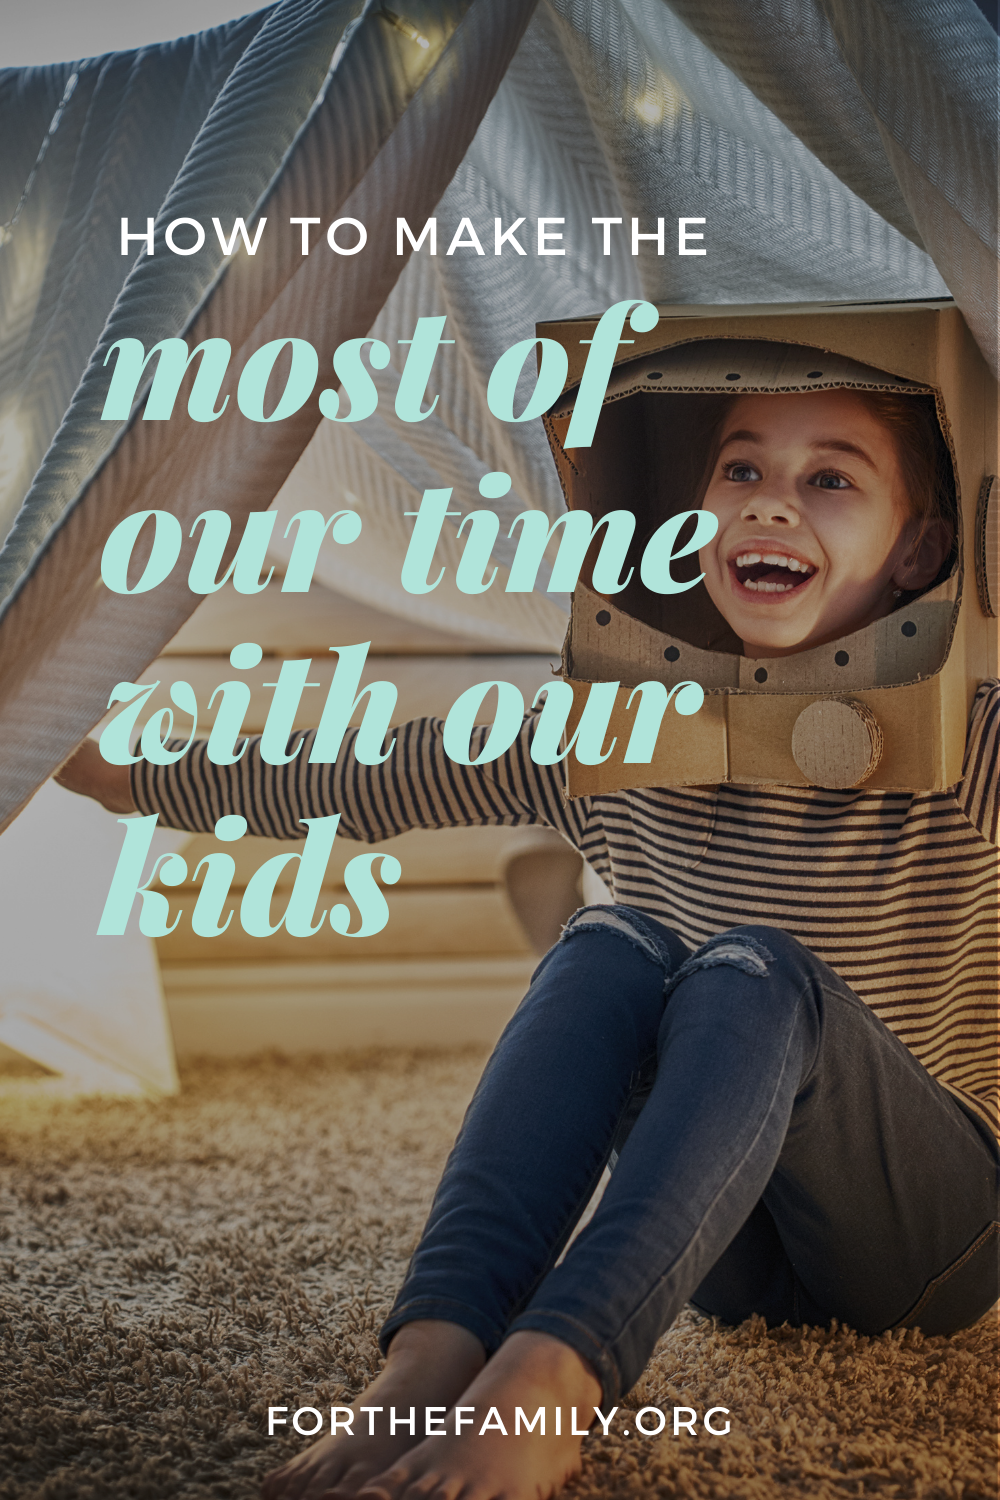 How to Make the Most of Our Time With Our Kids